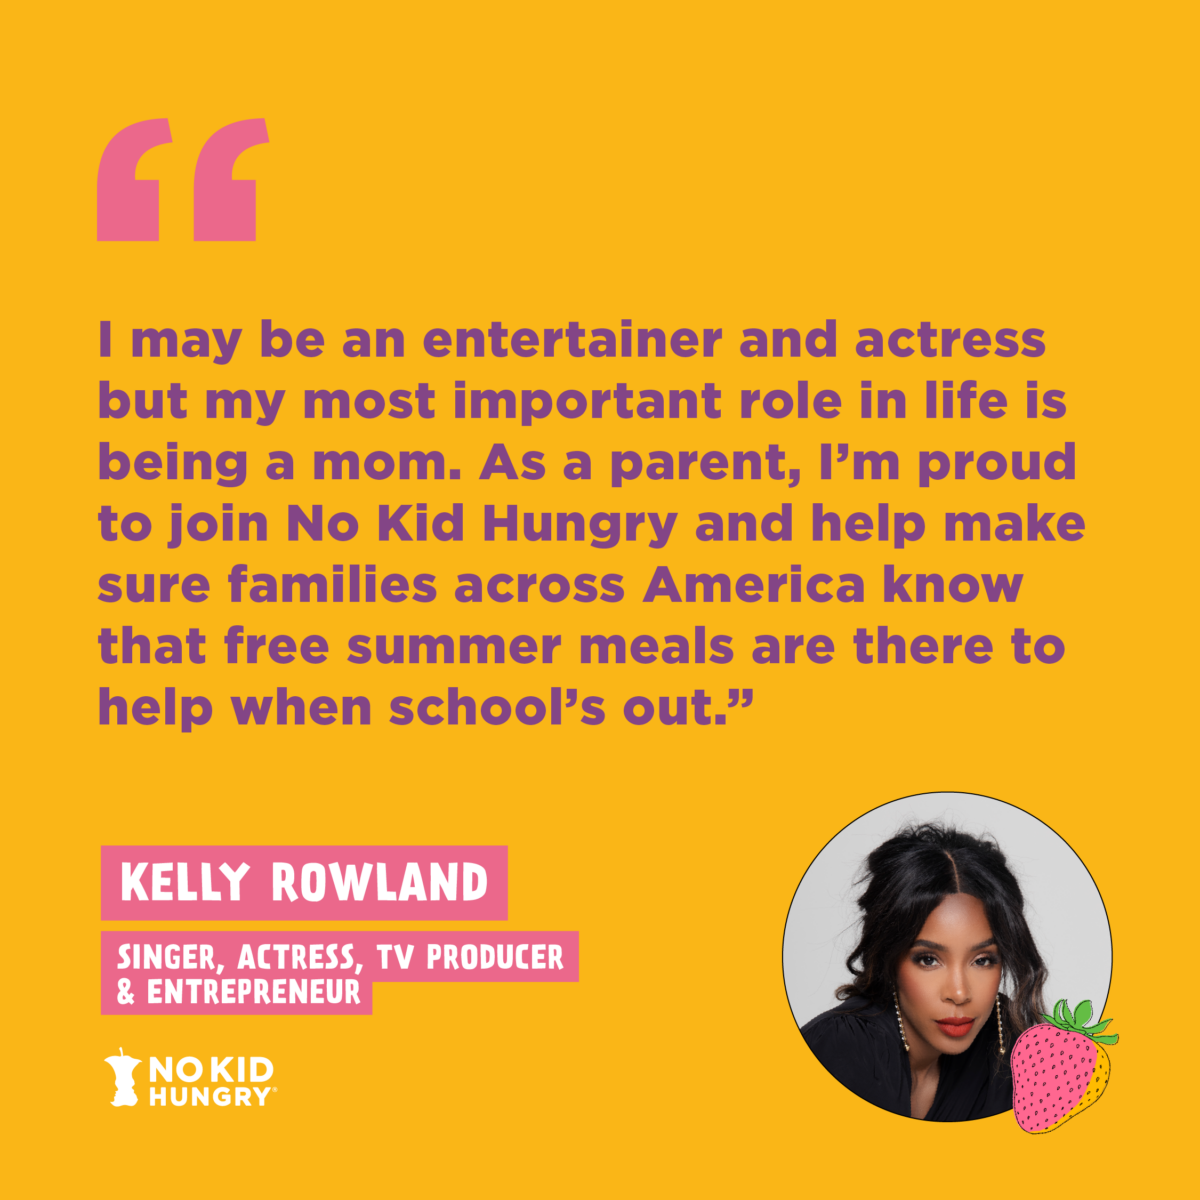 Kelly Rowland for No Kid Hungry